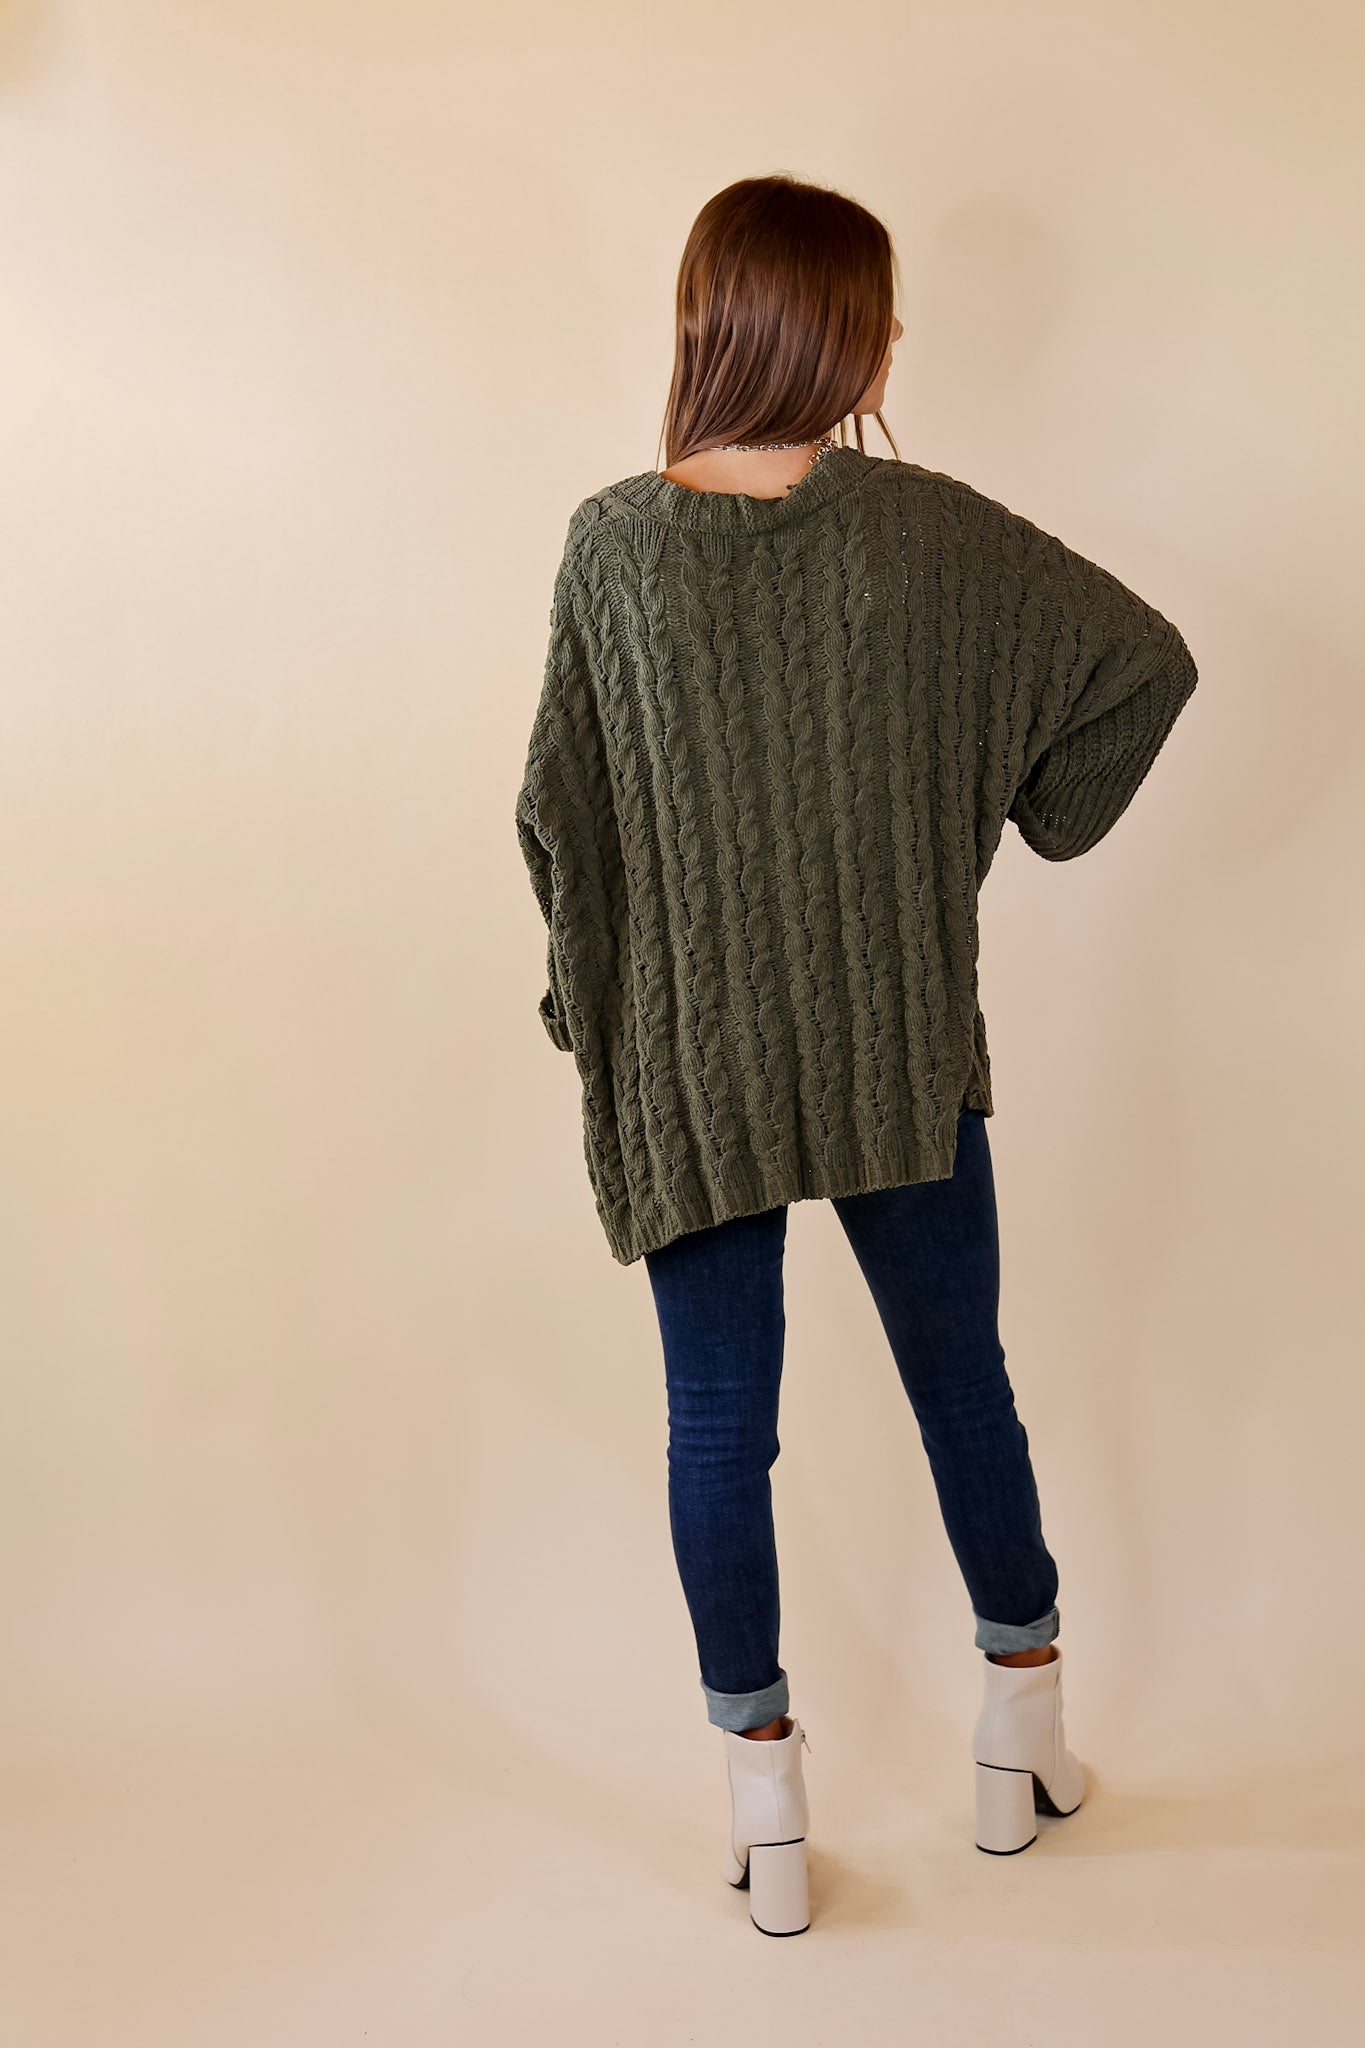 On My Level Chenille Cable Knit Open Front Cardigan in Olive Green - Giddy Up Glamour Boutique